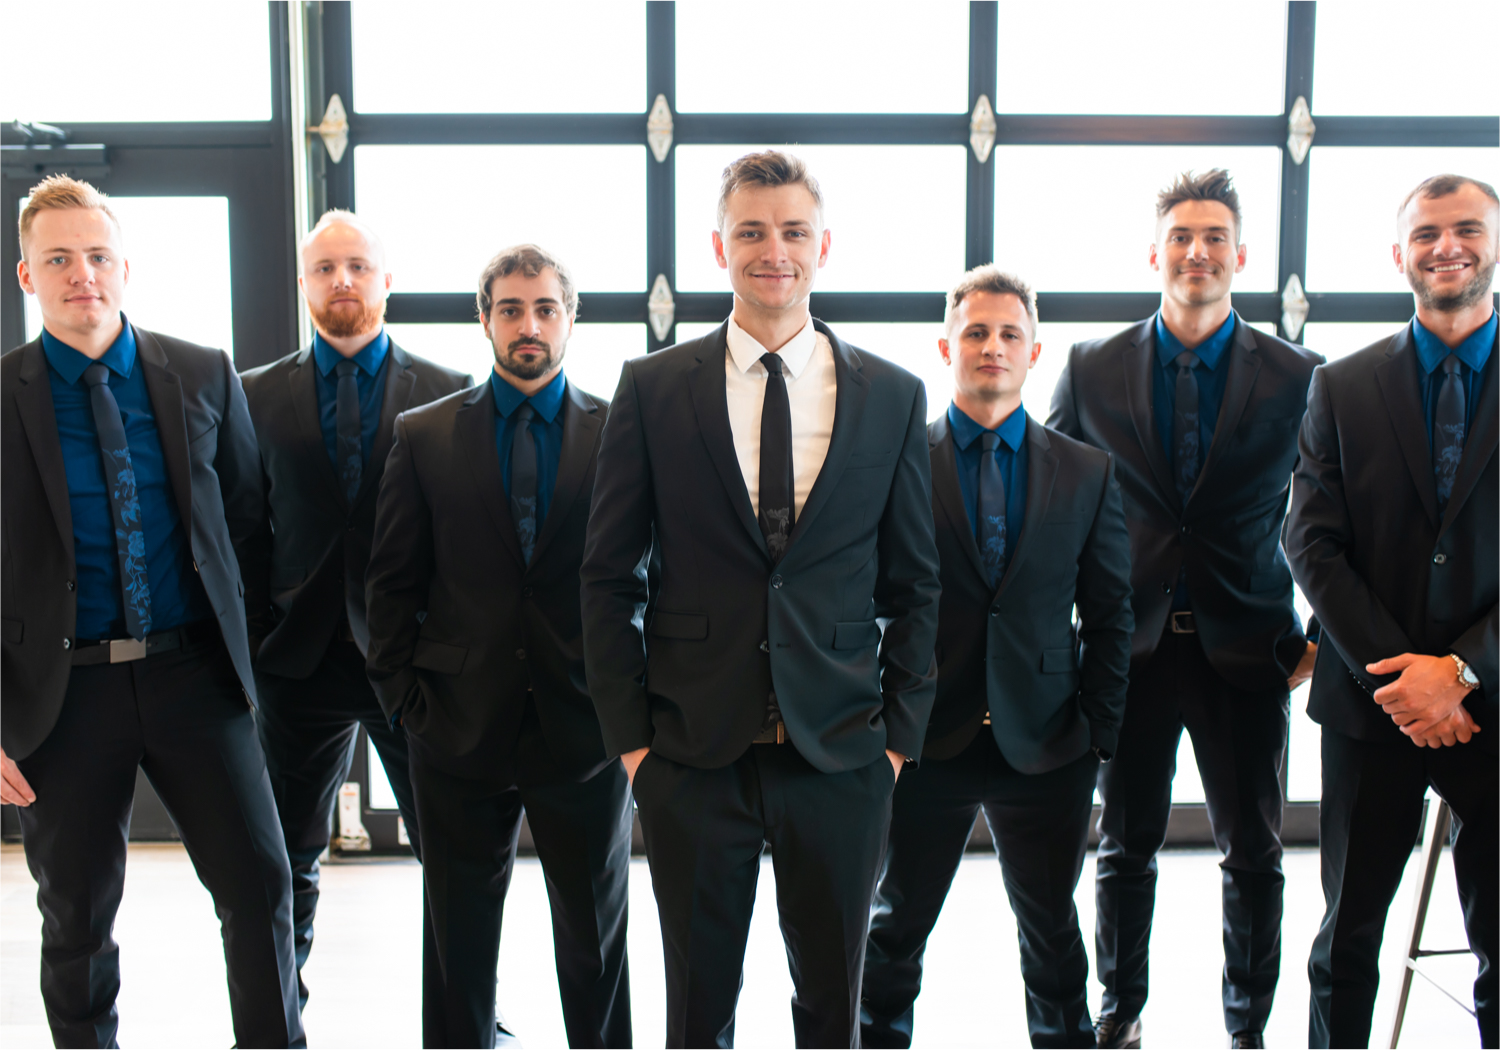 Romantic and Rustic Wedding at The Mill in Windsor | Britni Girard Photography | Colorado based wedding photography and videography team | Groomsmen in bar at The Windsor Mill | Royal Blue and White Wedding | Groomsmen attire from Express